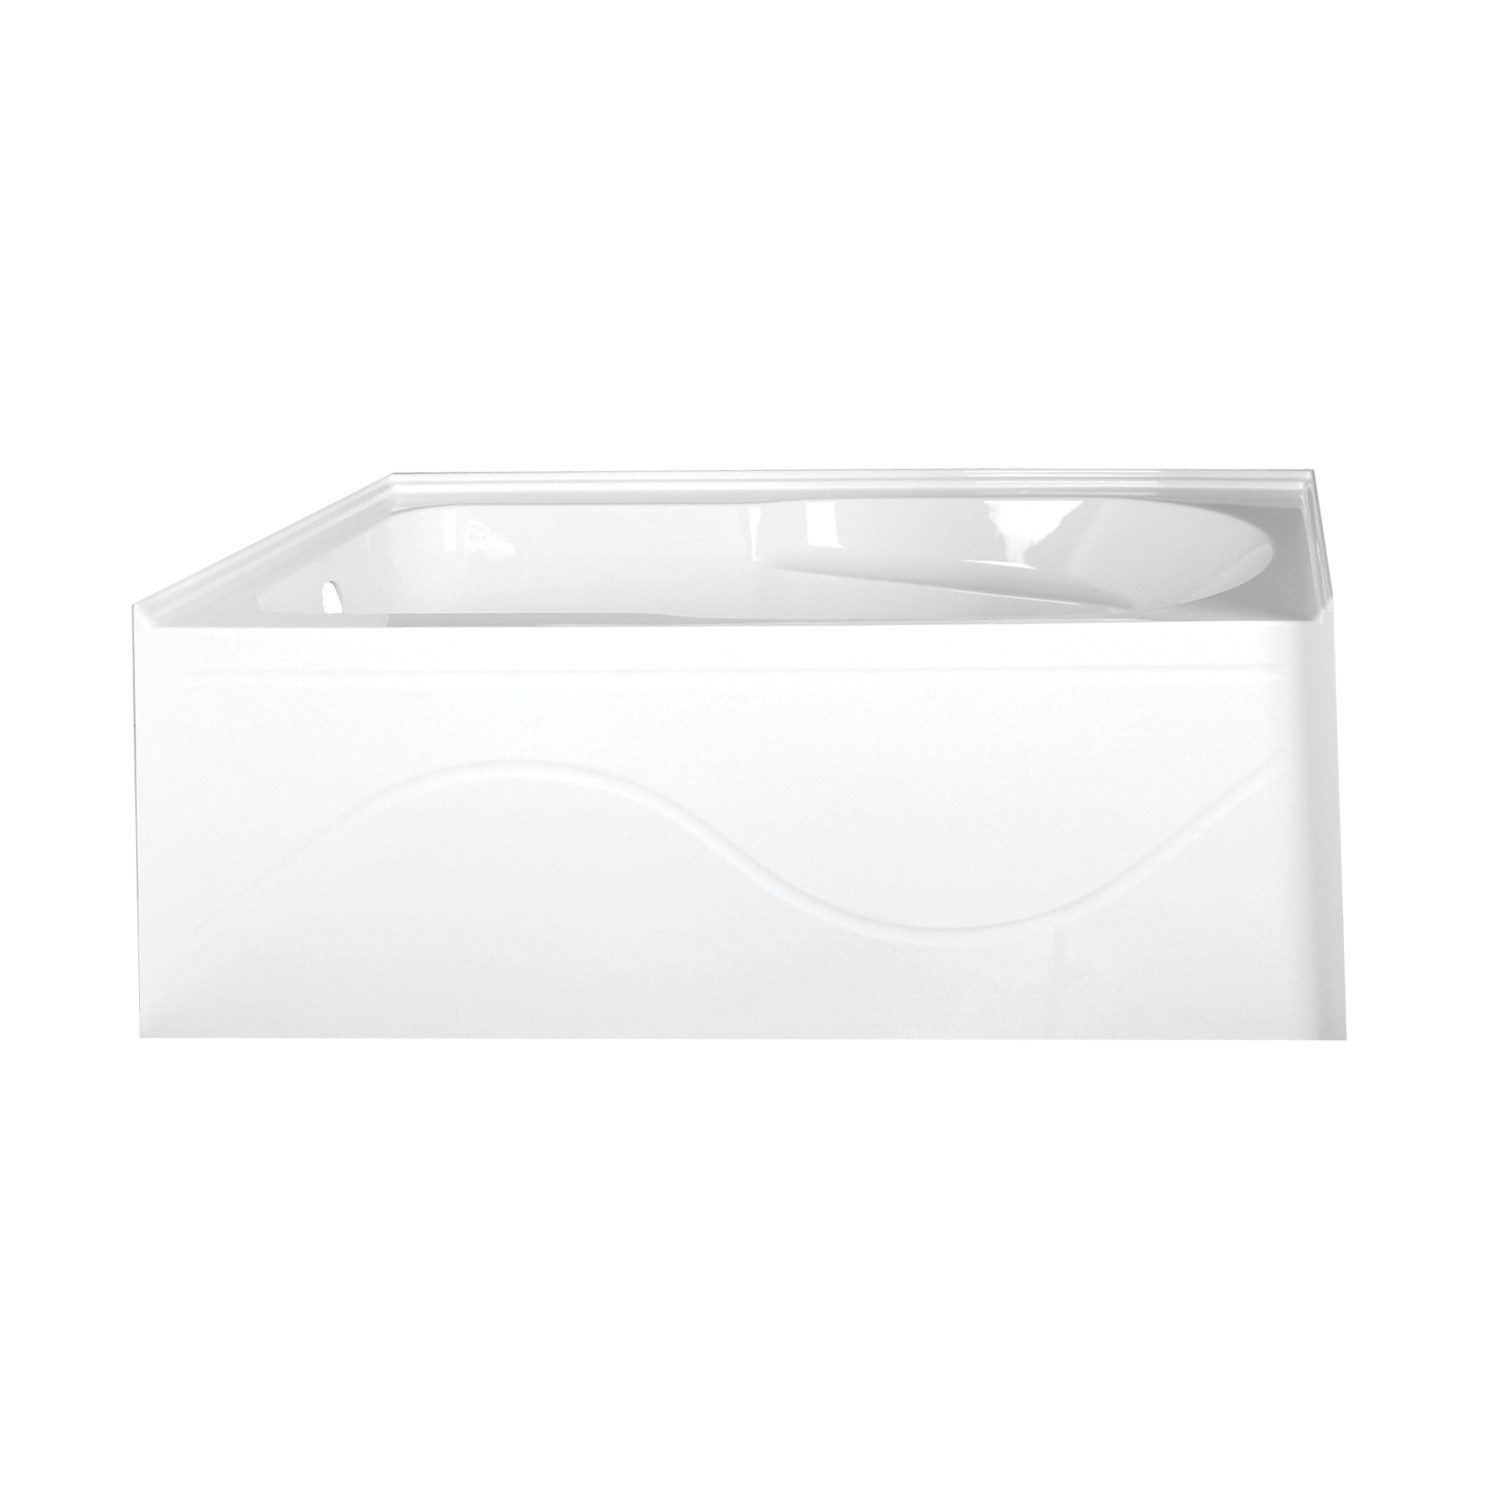 KINGSTON BRASS VTAP603022L AQUA EDEN 60-INCH ACRYLIC ALCOVE TUB WITH ANTI SKID AND LEFT HAND DRAIN HOLE IN WHITE